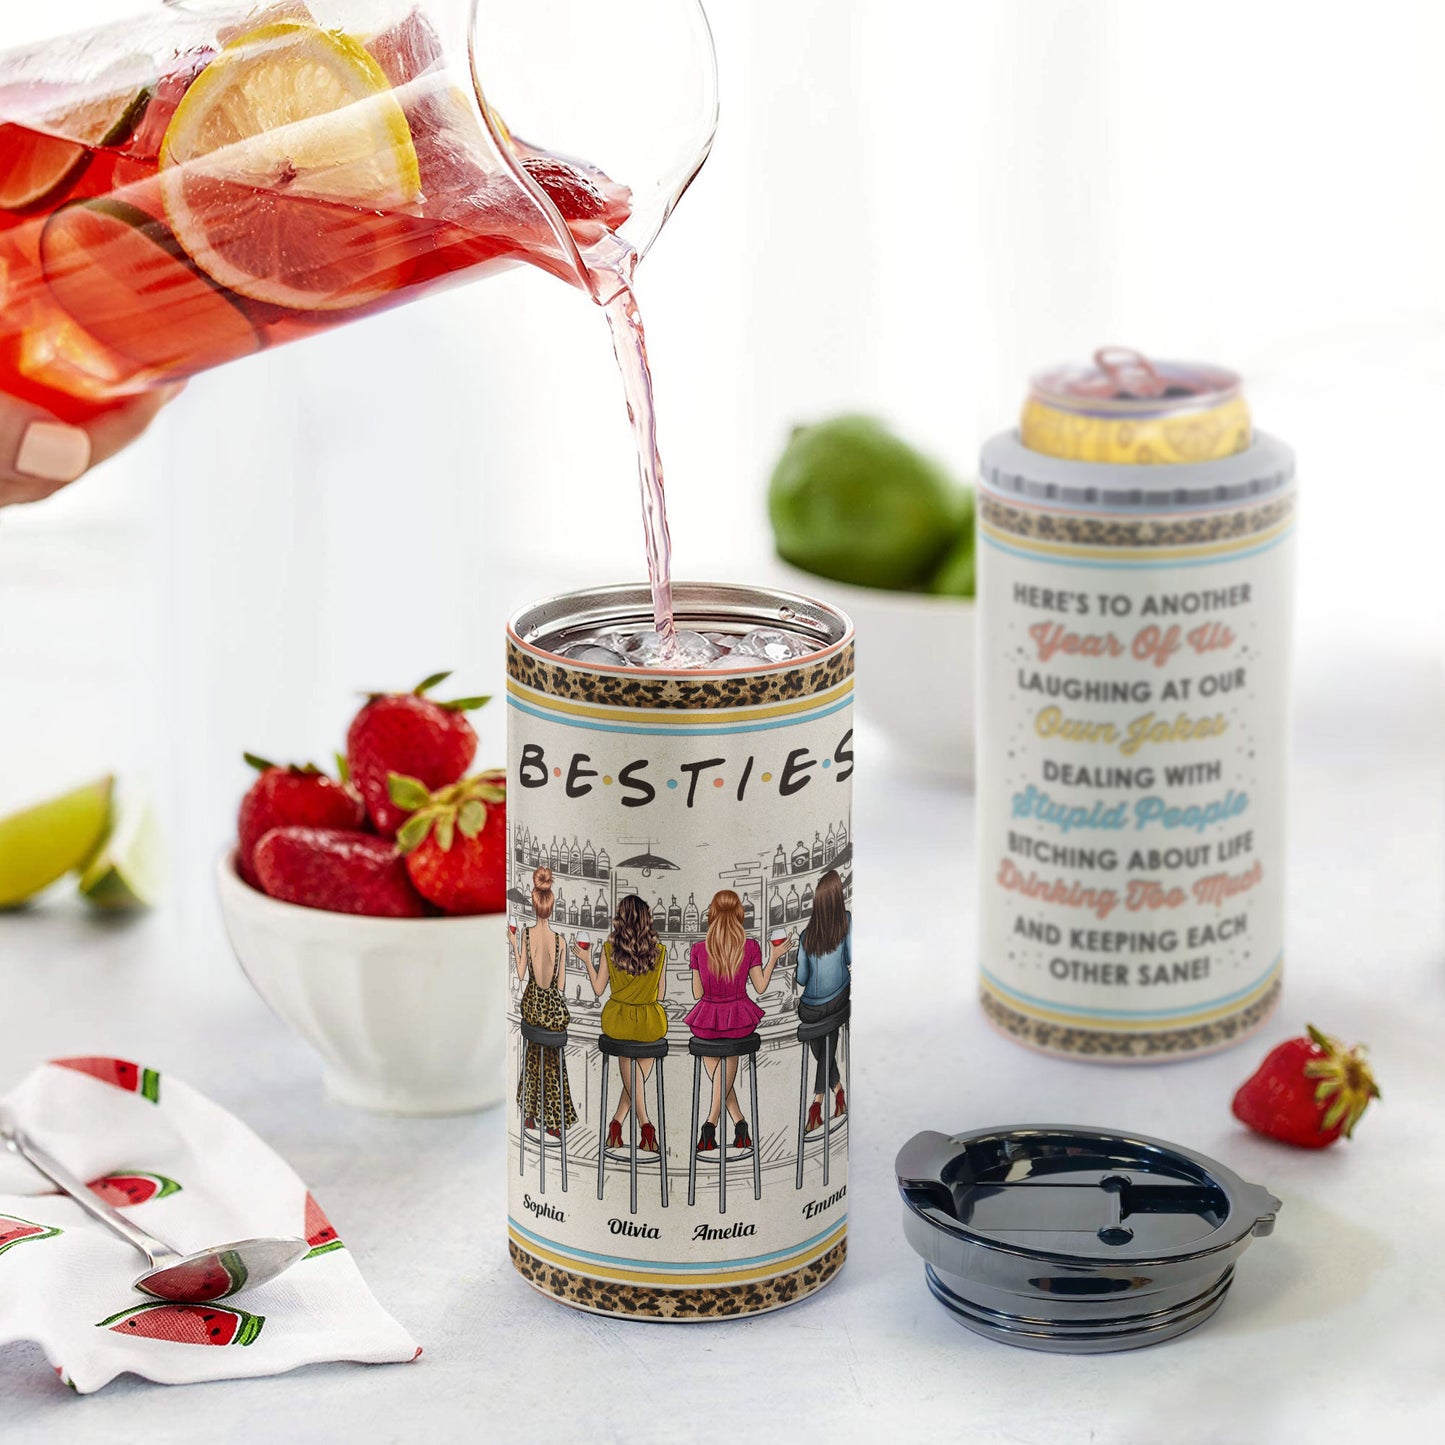 Here's To Another Year Of Us - Personalized Can Cooler - Birthday, Funny Gift For Besties, Friends, Soul Sisters, BFFs